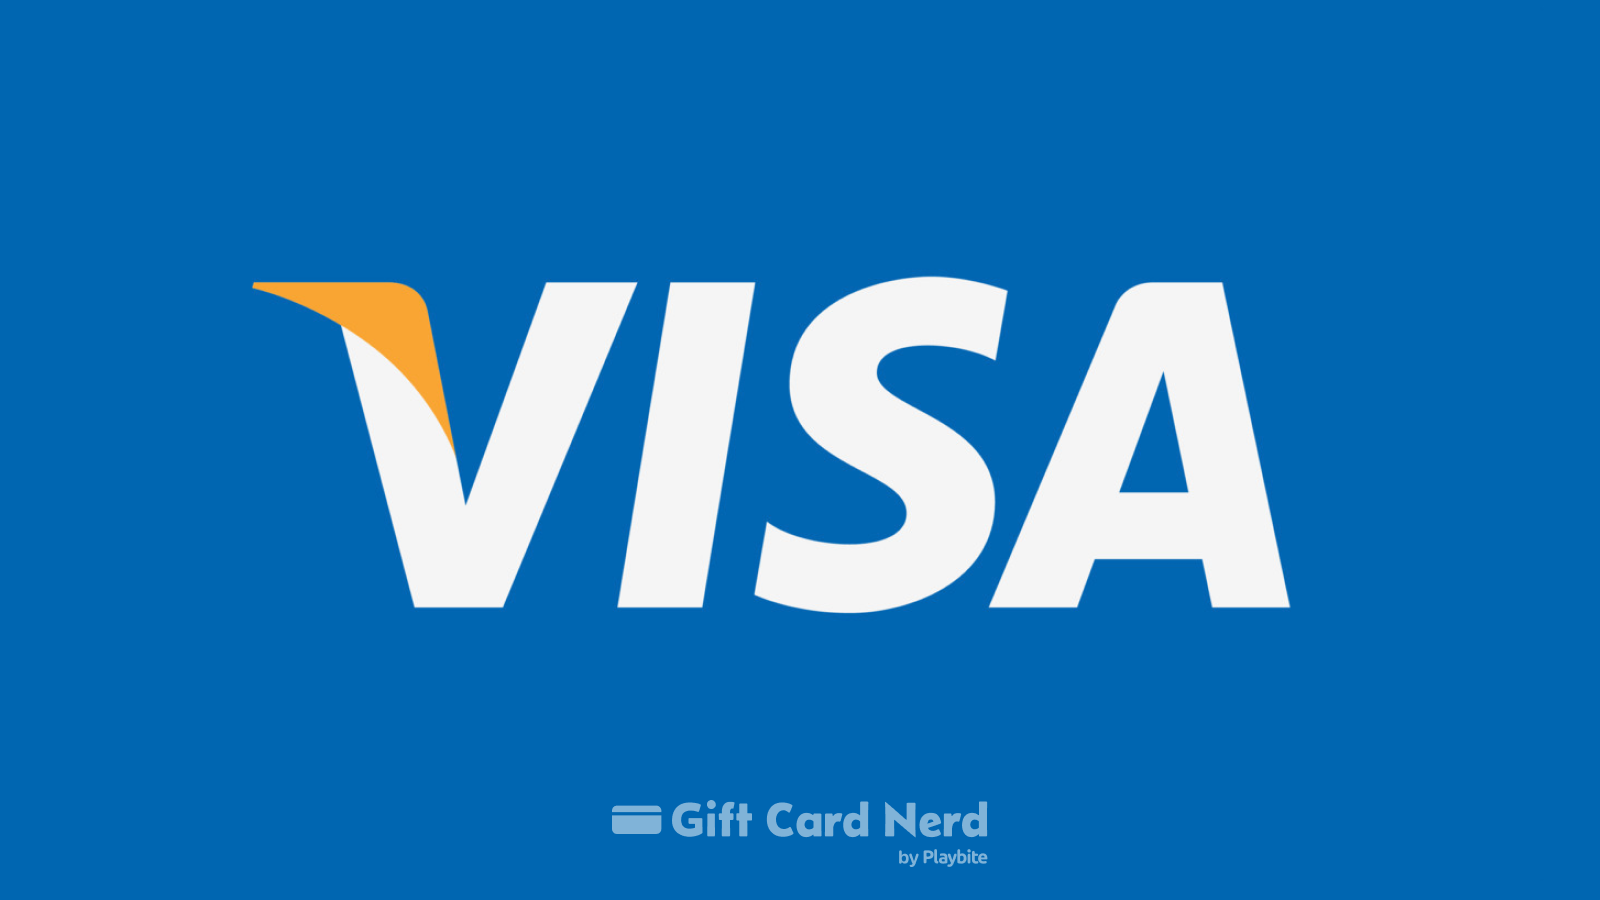 Can You Use a Visa Gift Card on Postmates?